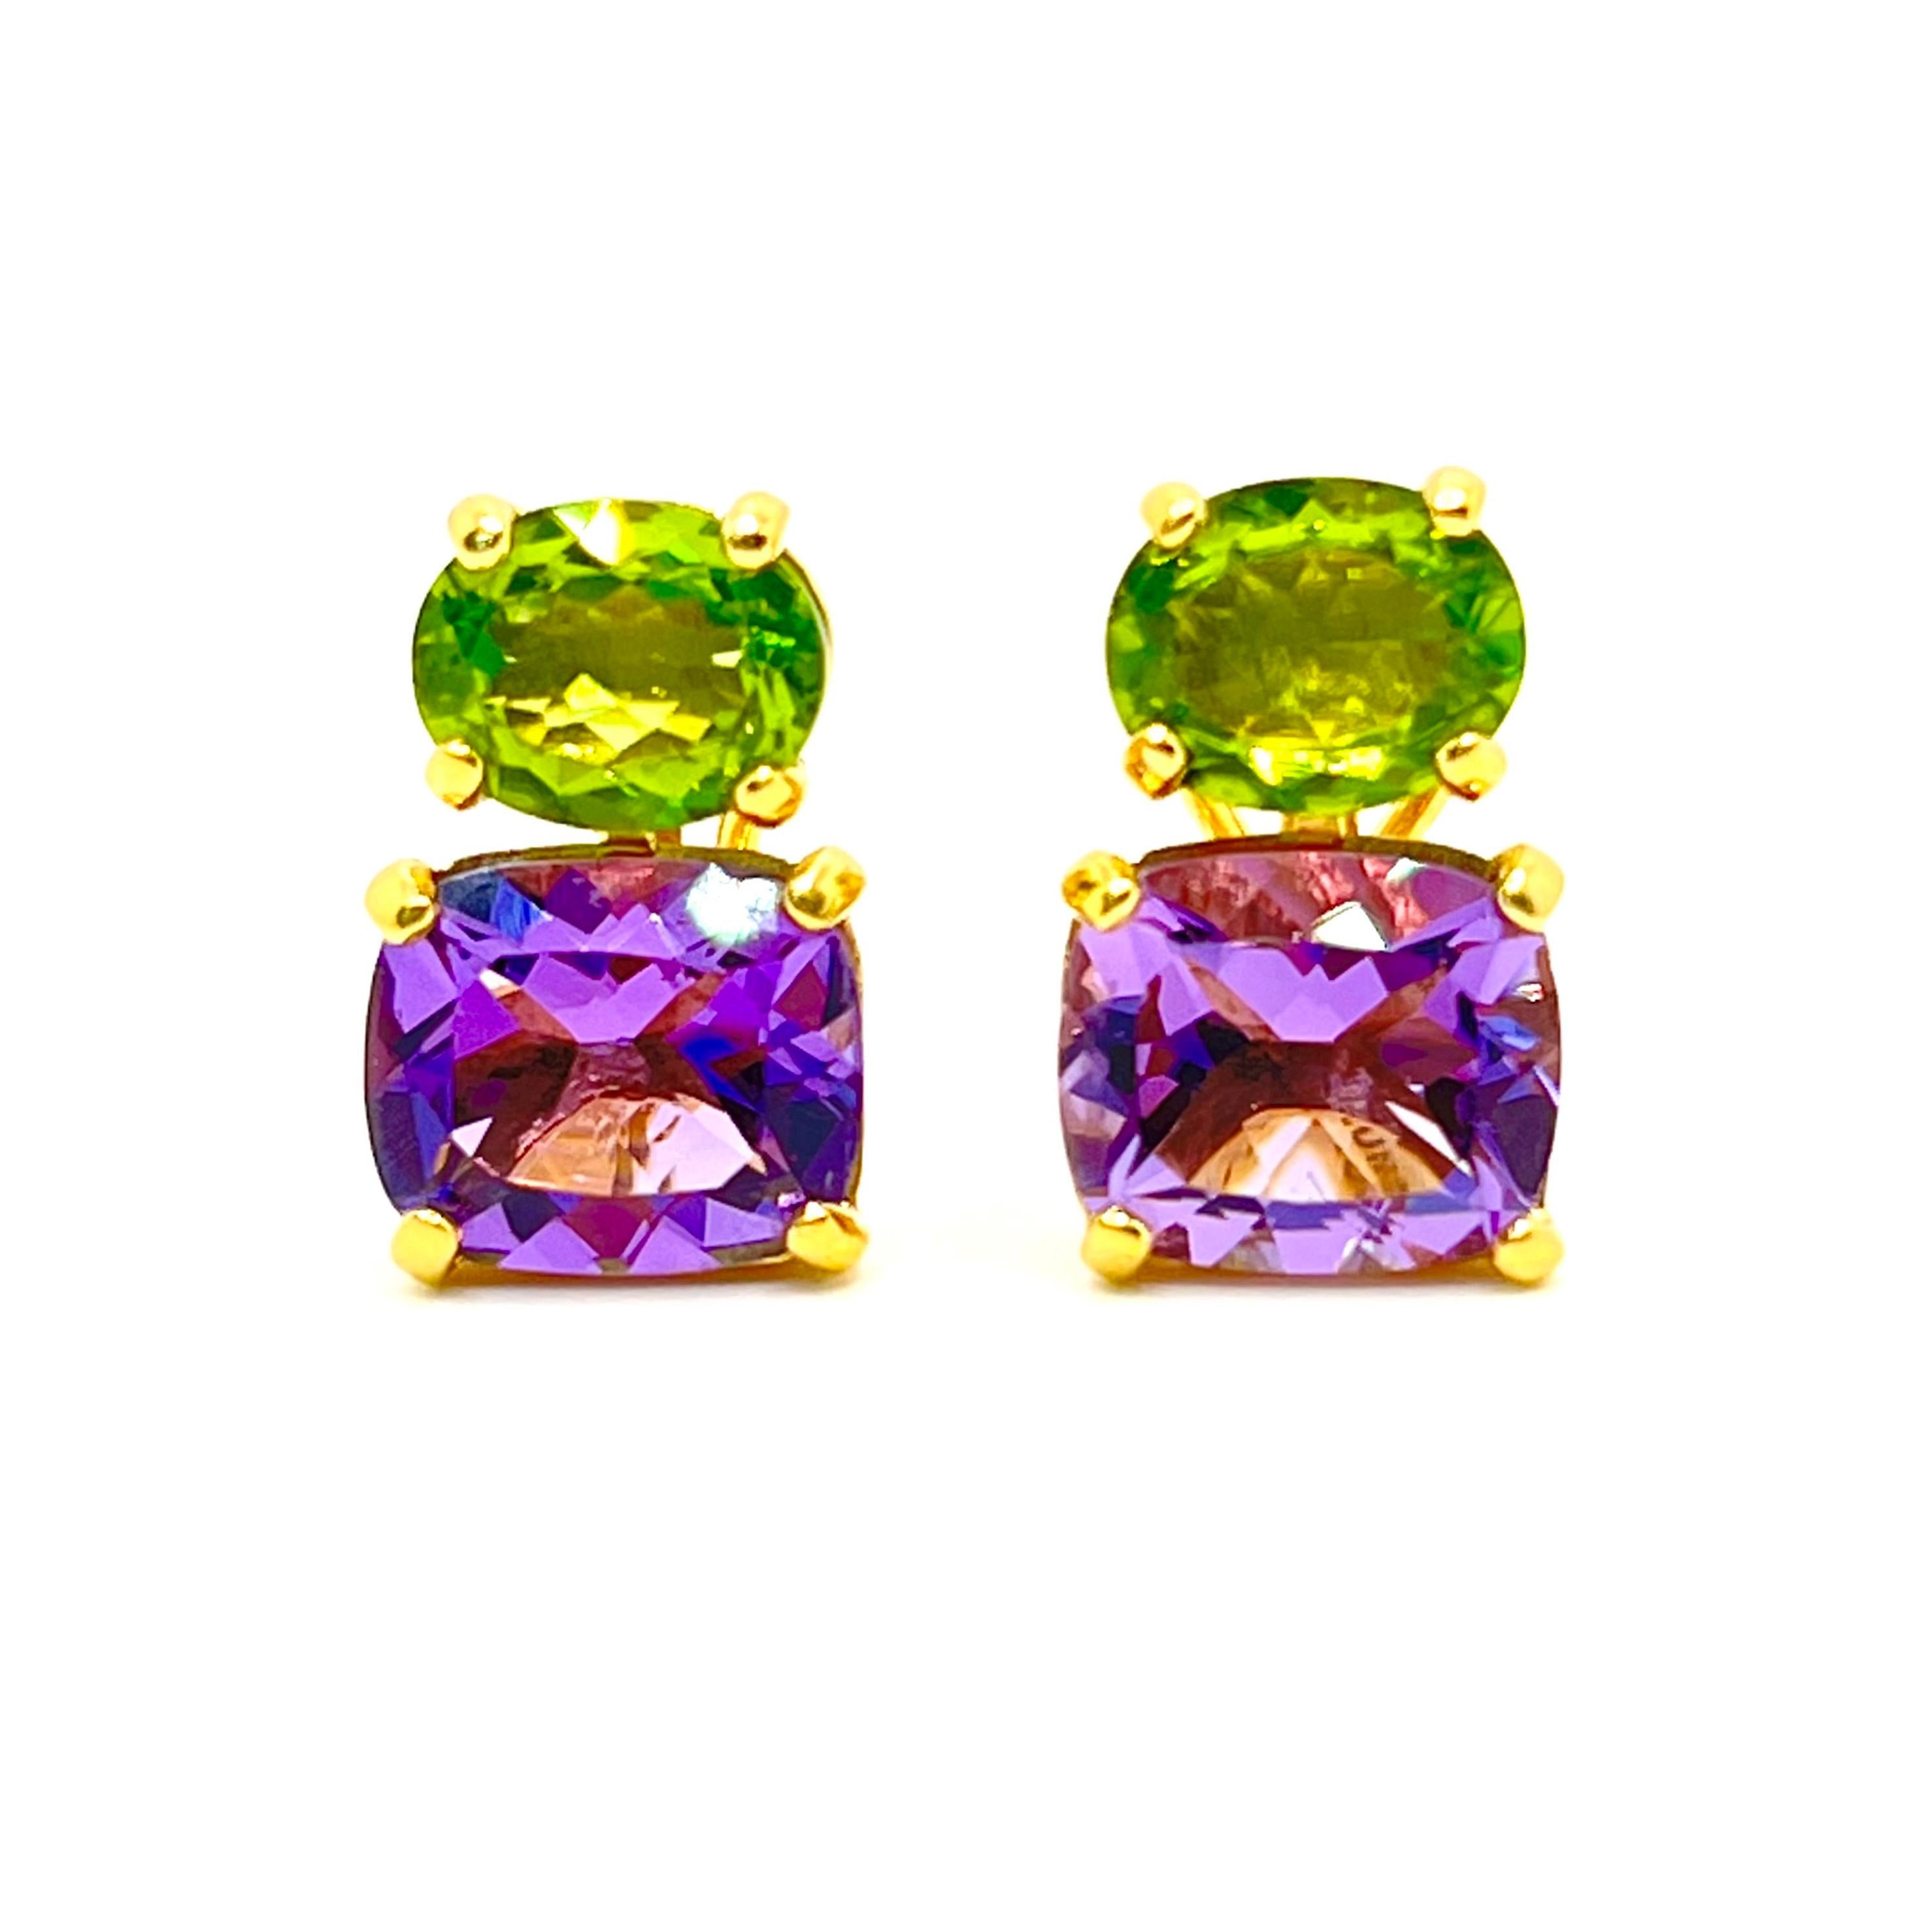 These stunning pair of earrings features a pair of genuine oval green peridot with cushion-cut amethyst, handset in 18k yellow gold vermeil over sterling silver. The green and purple combination just look so beautiful together! Straight post with